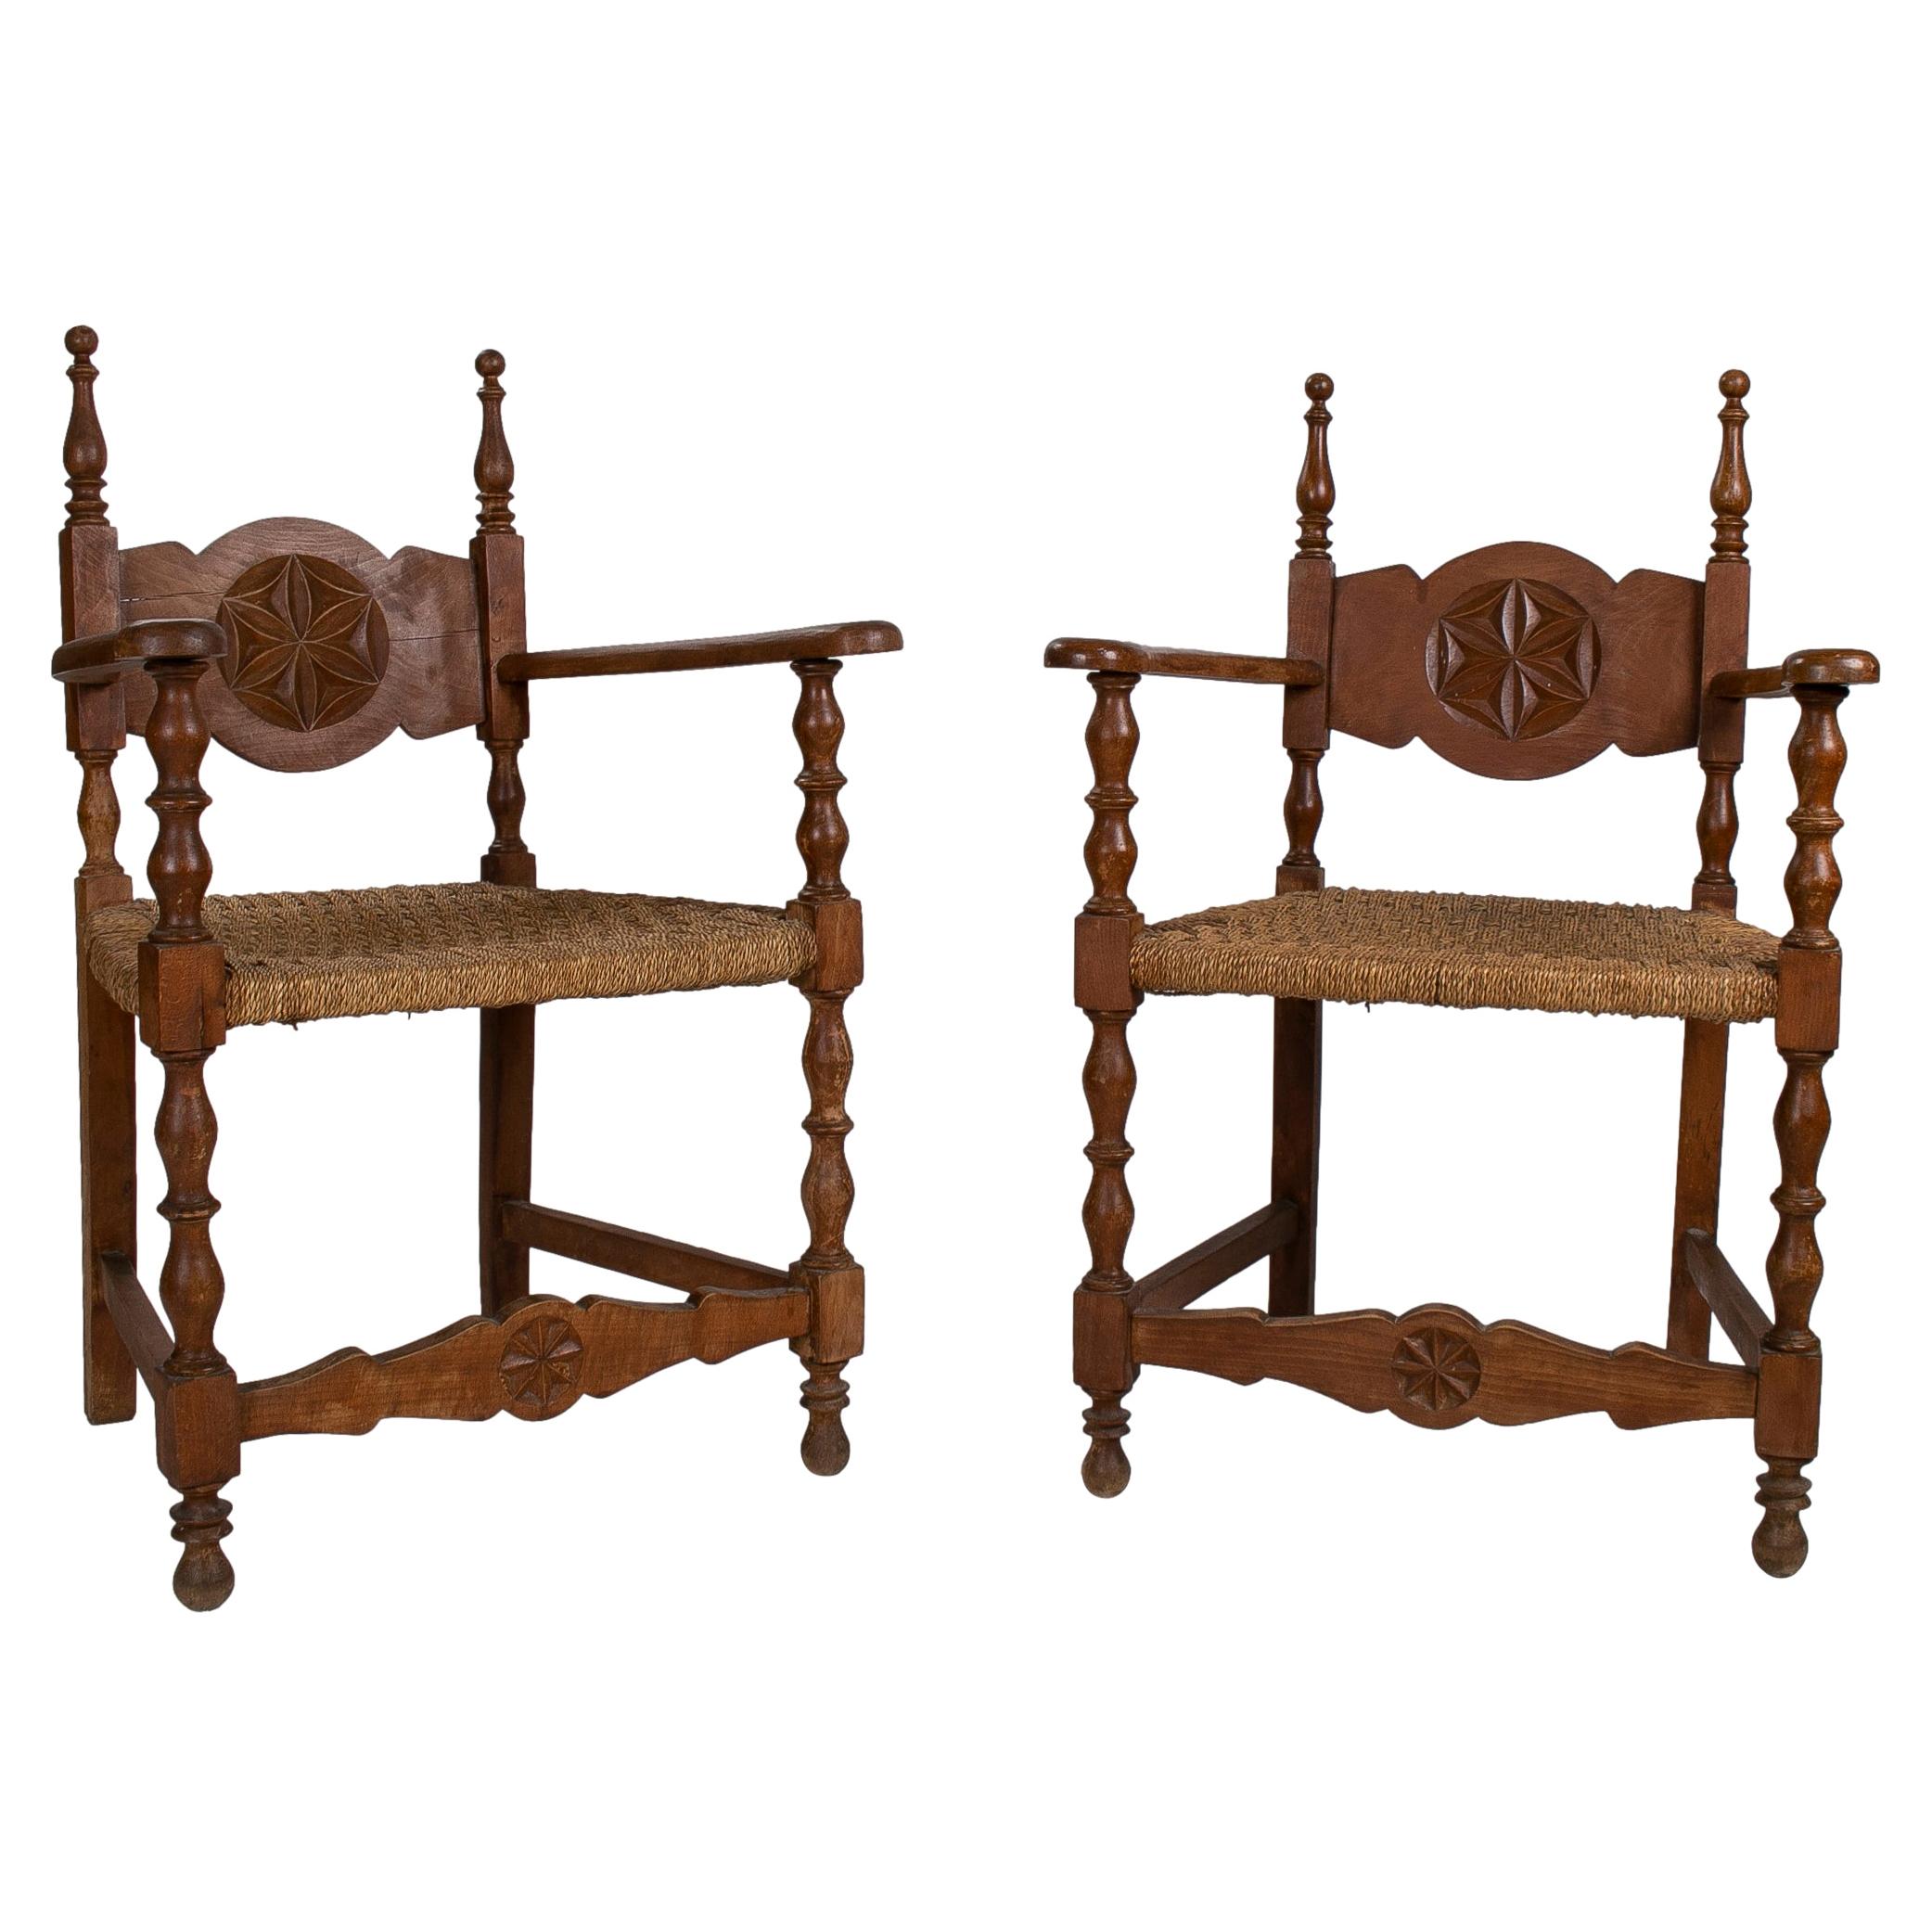 Pair of 1950s Spanish Wooden Chairs w/ Woven Dry Rope Seats